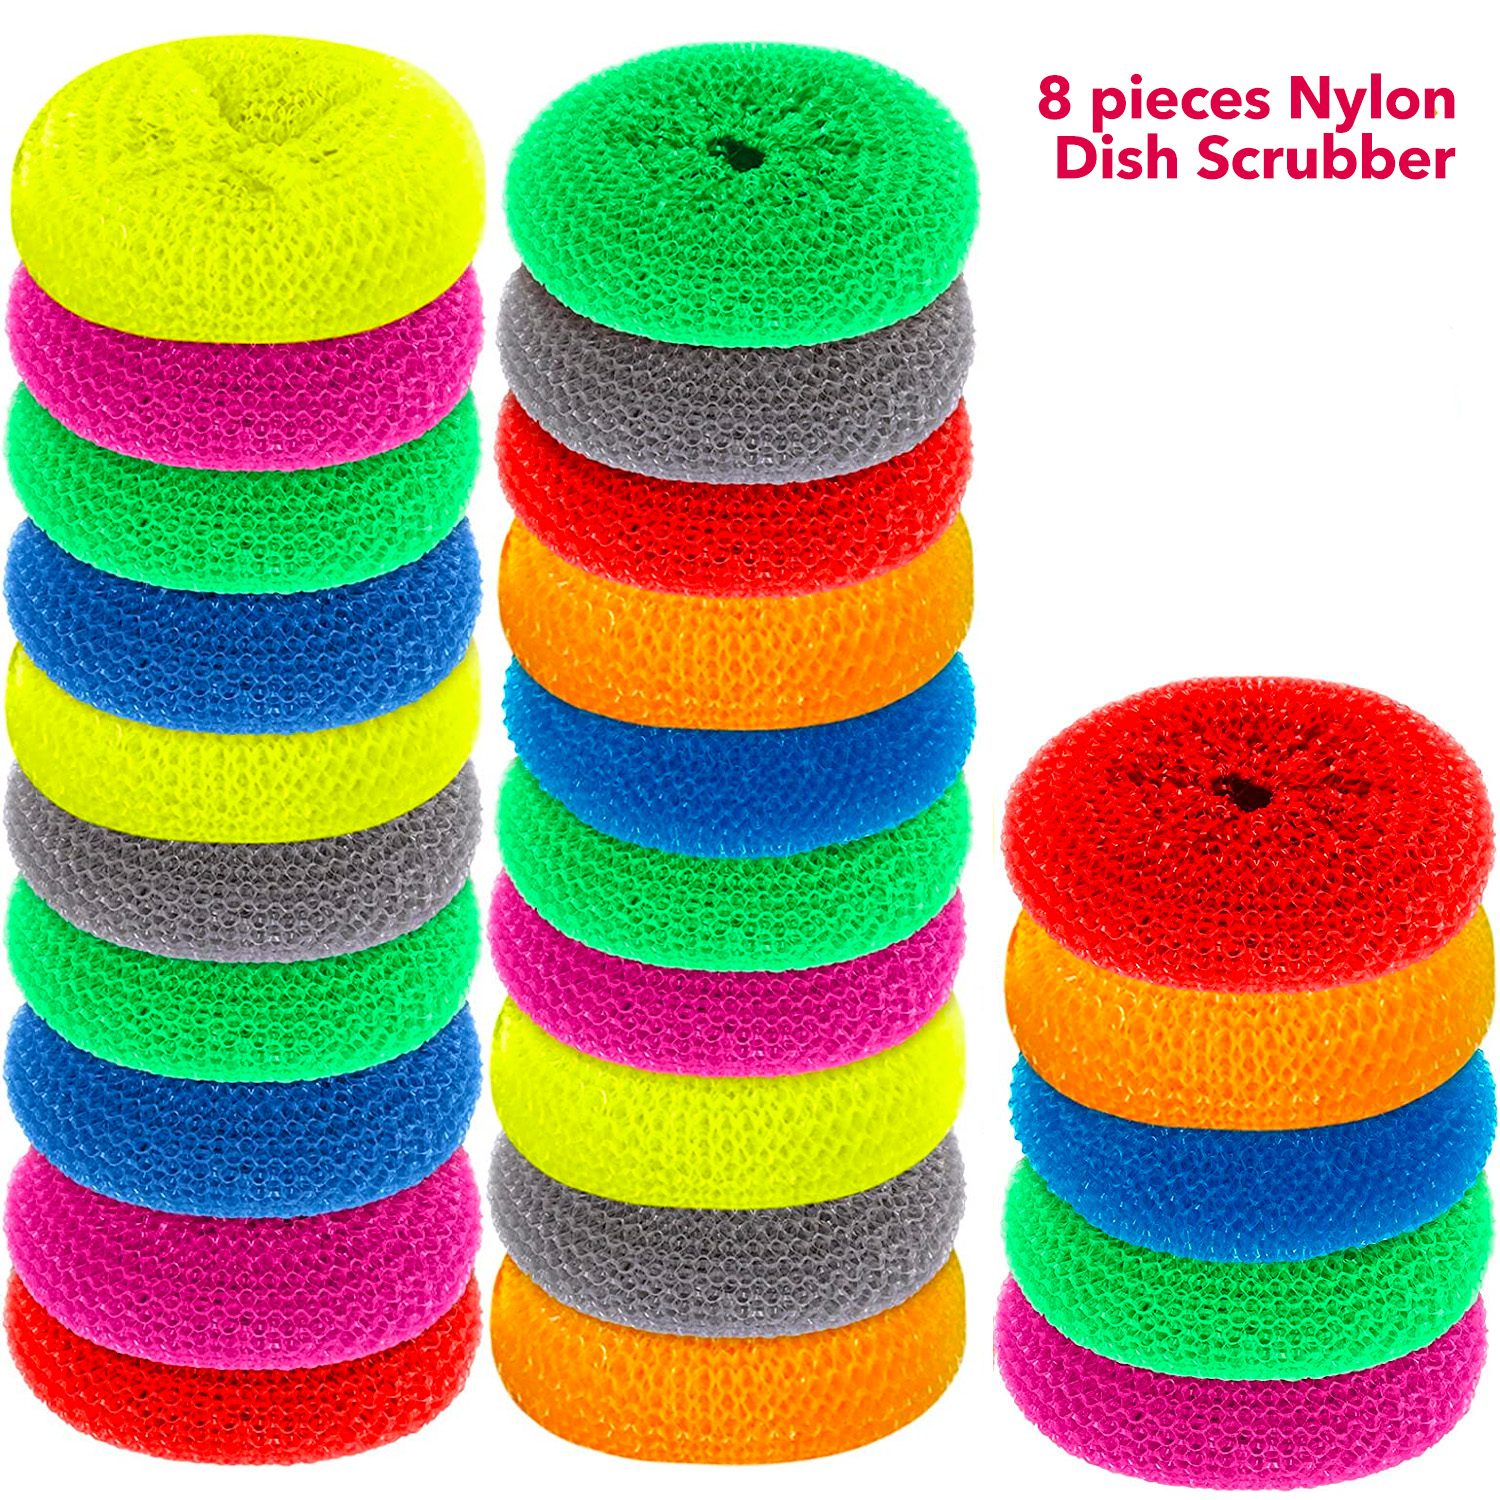 Cleaning Ball Flexible Dish Scrubber Plastic No Odor Durable Removing Rust Scouring Pad Cookware Cleaner Cleaning Ball